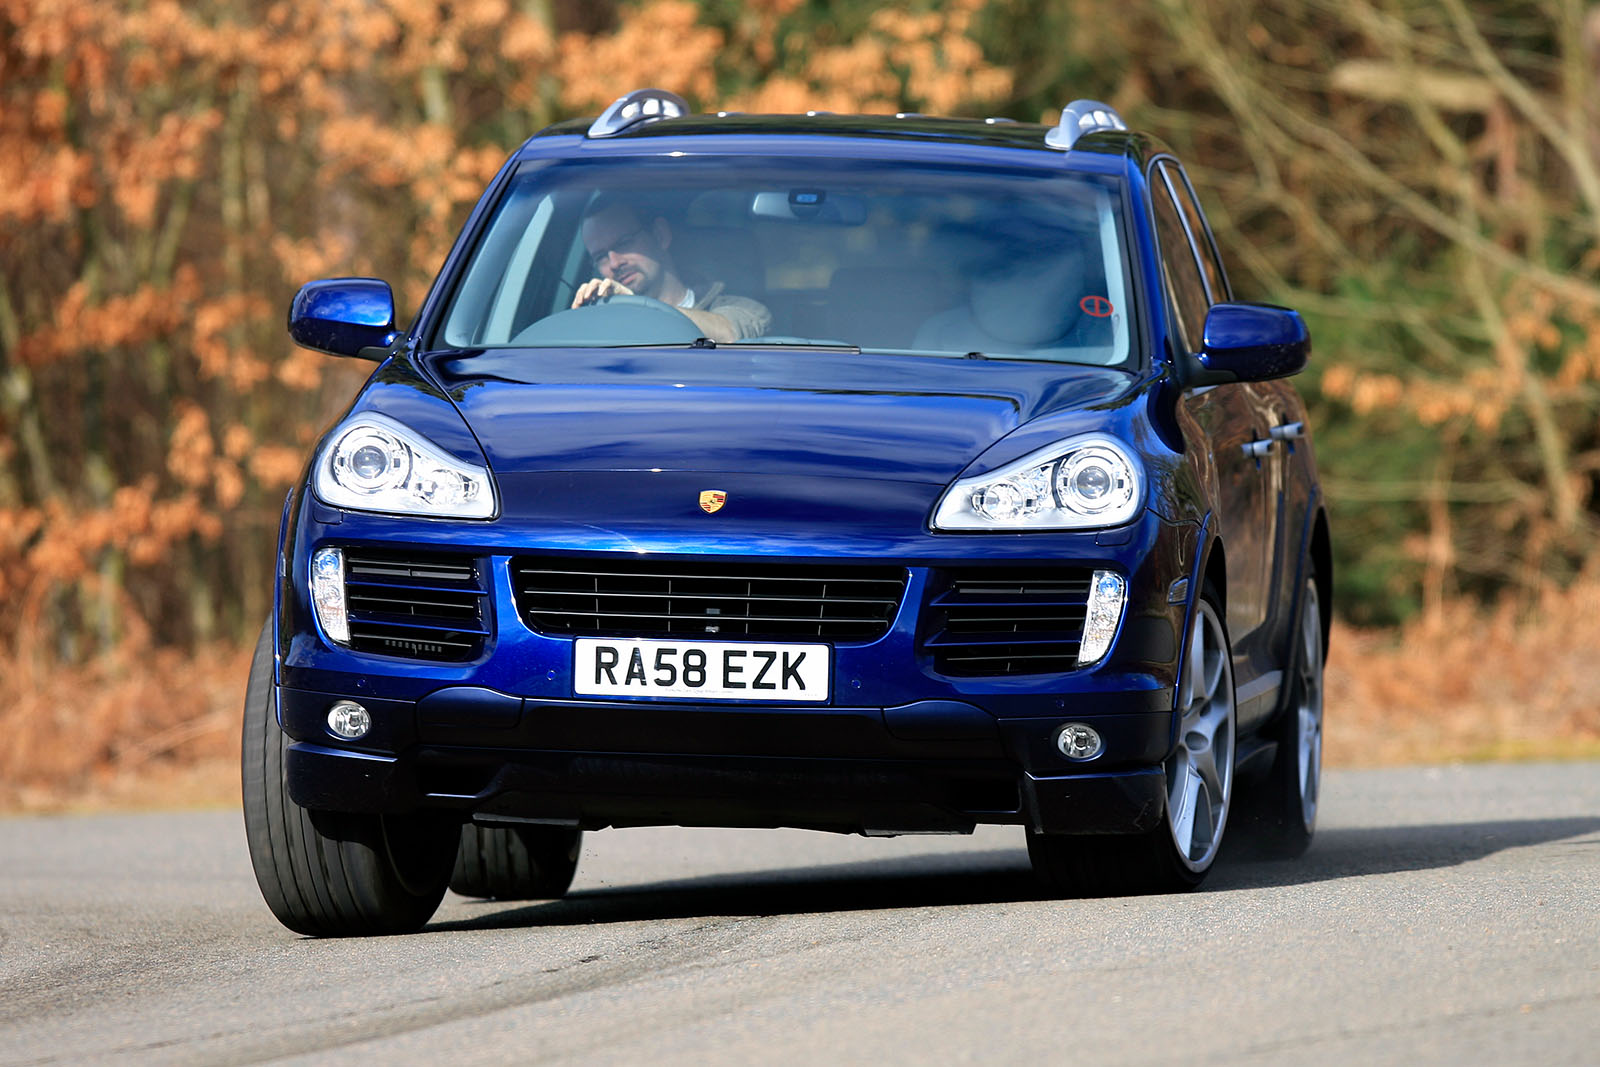 Used car buying guide: Porsche Cayenne